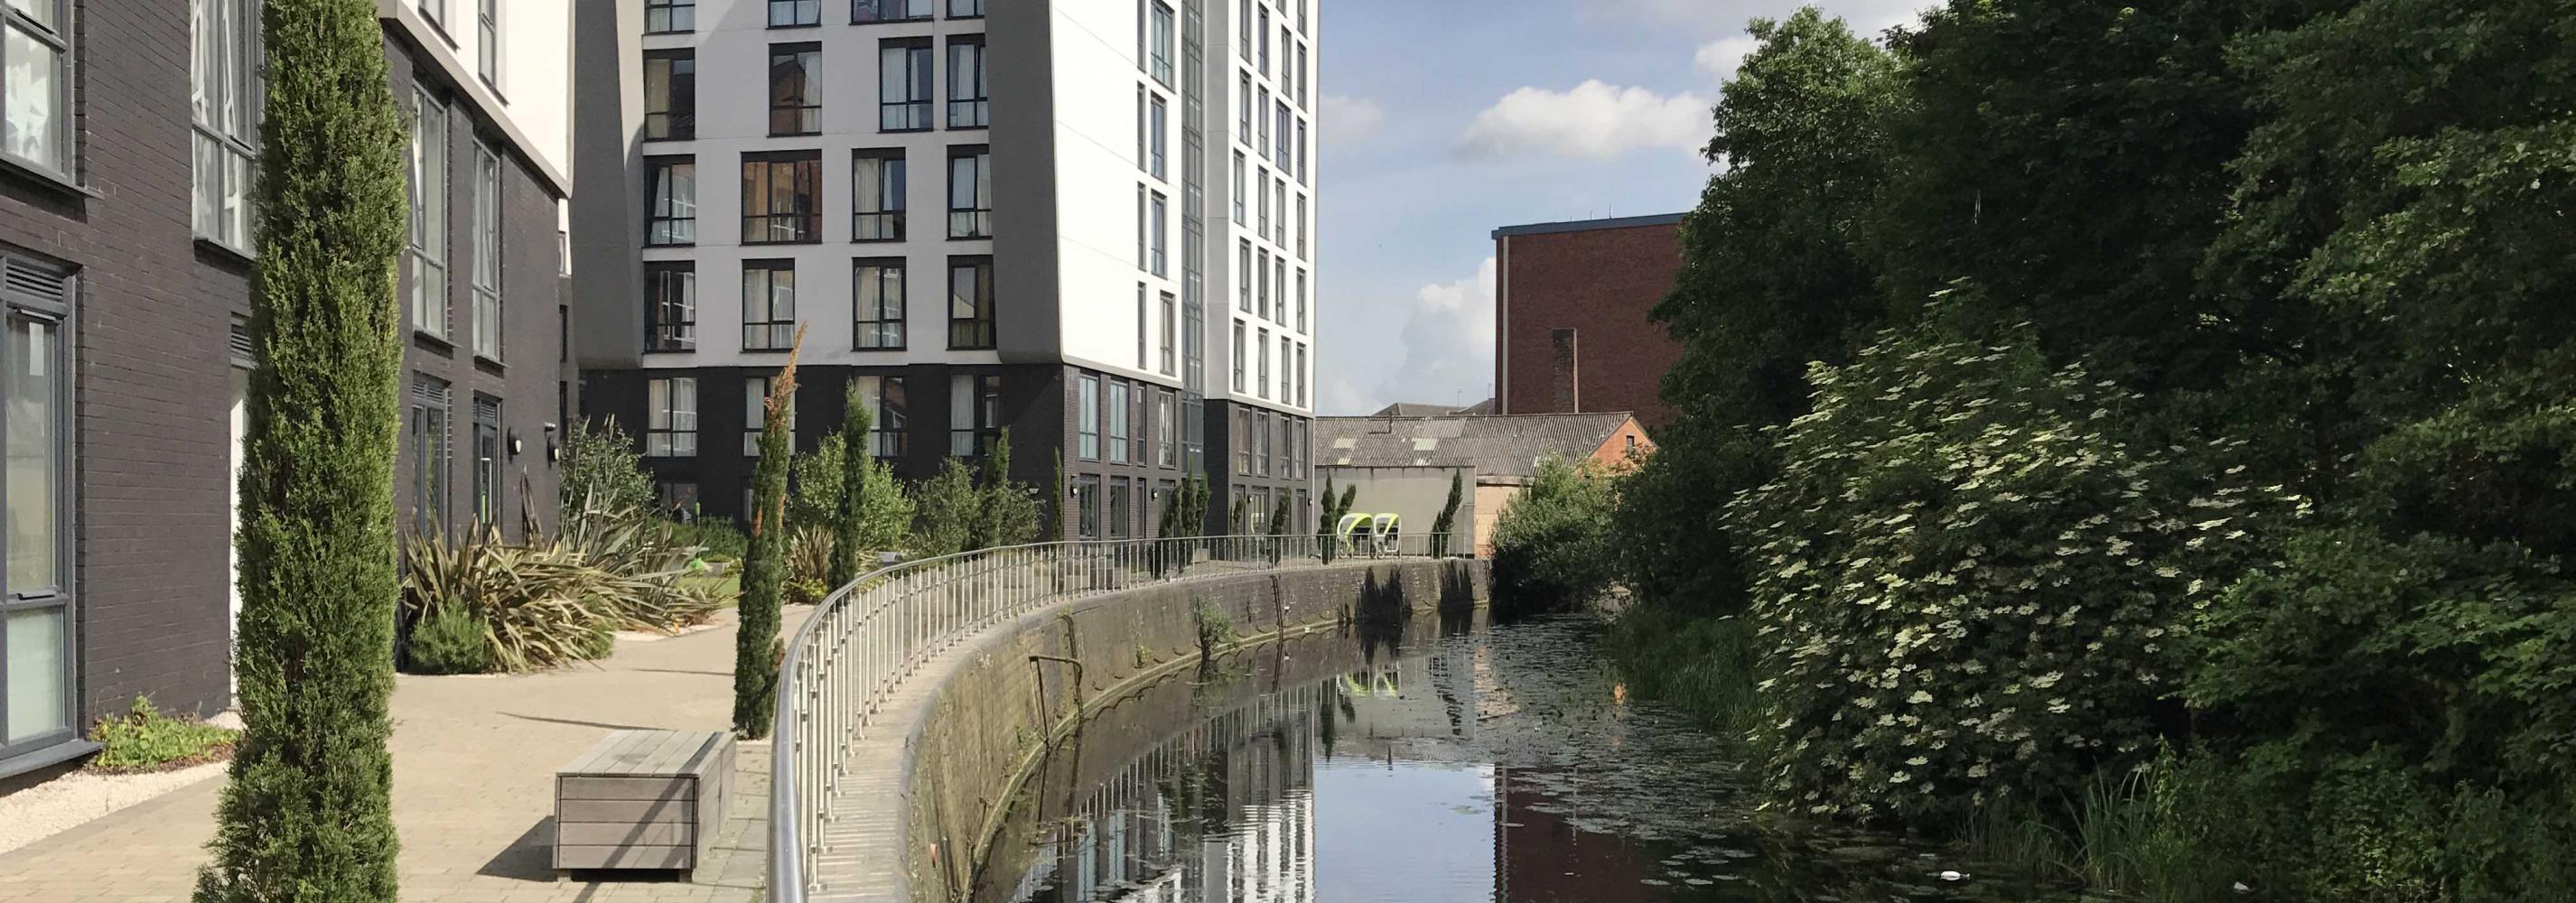 CODE Leicester's tranquil riverside location